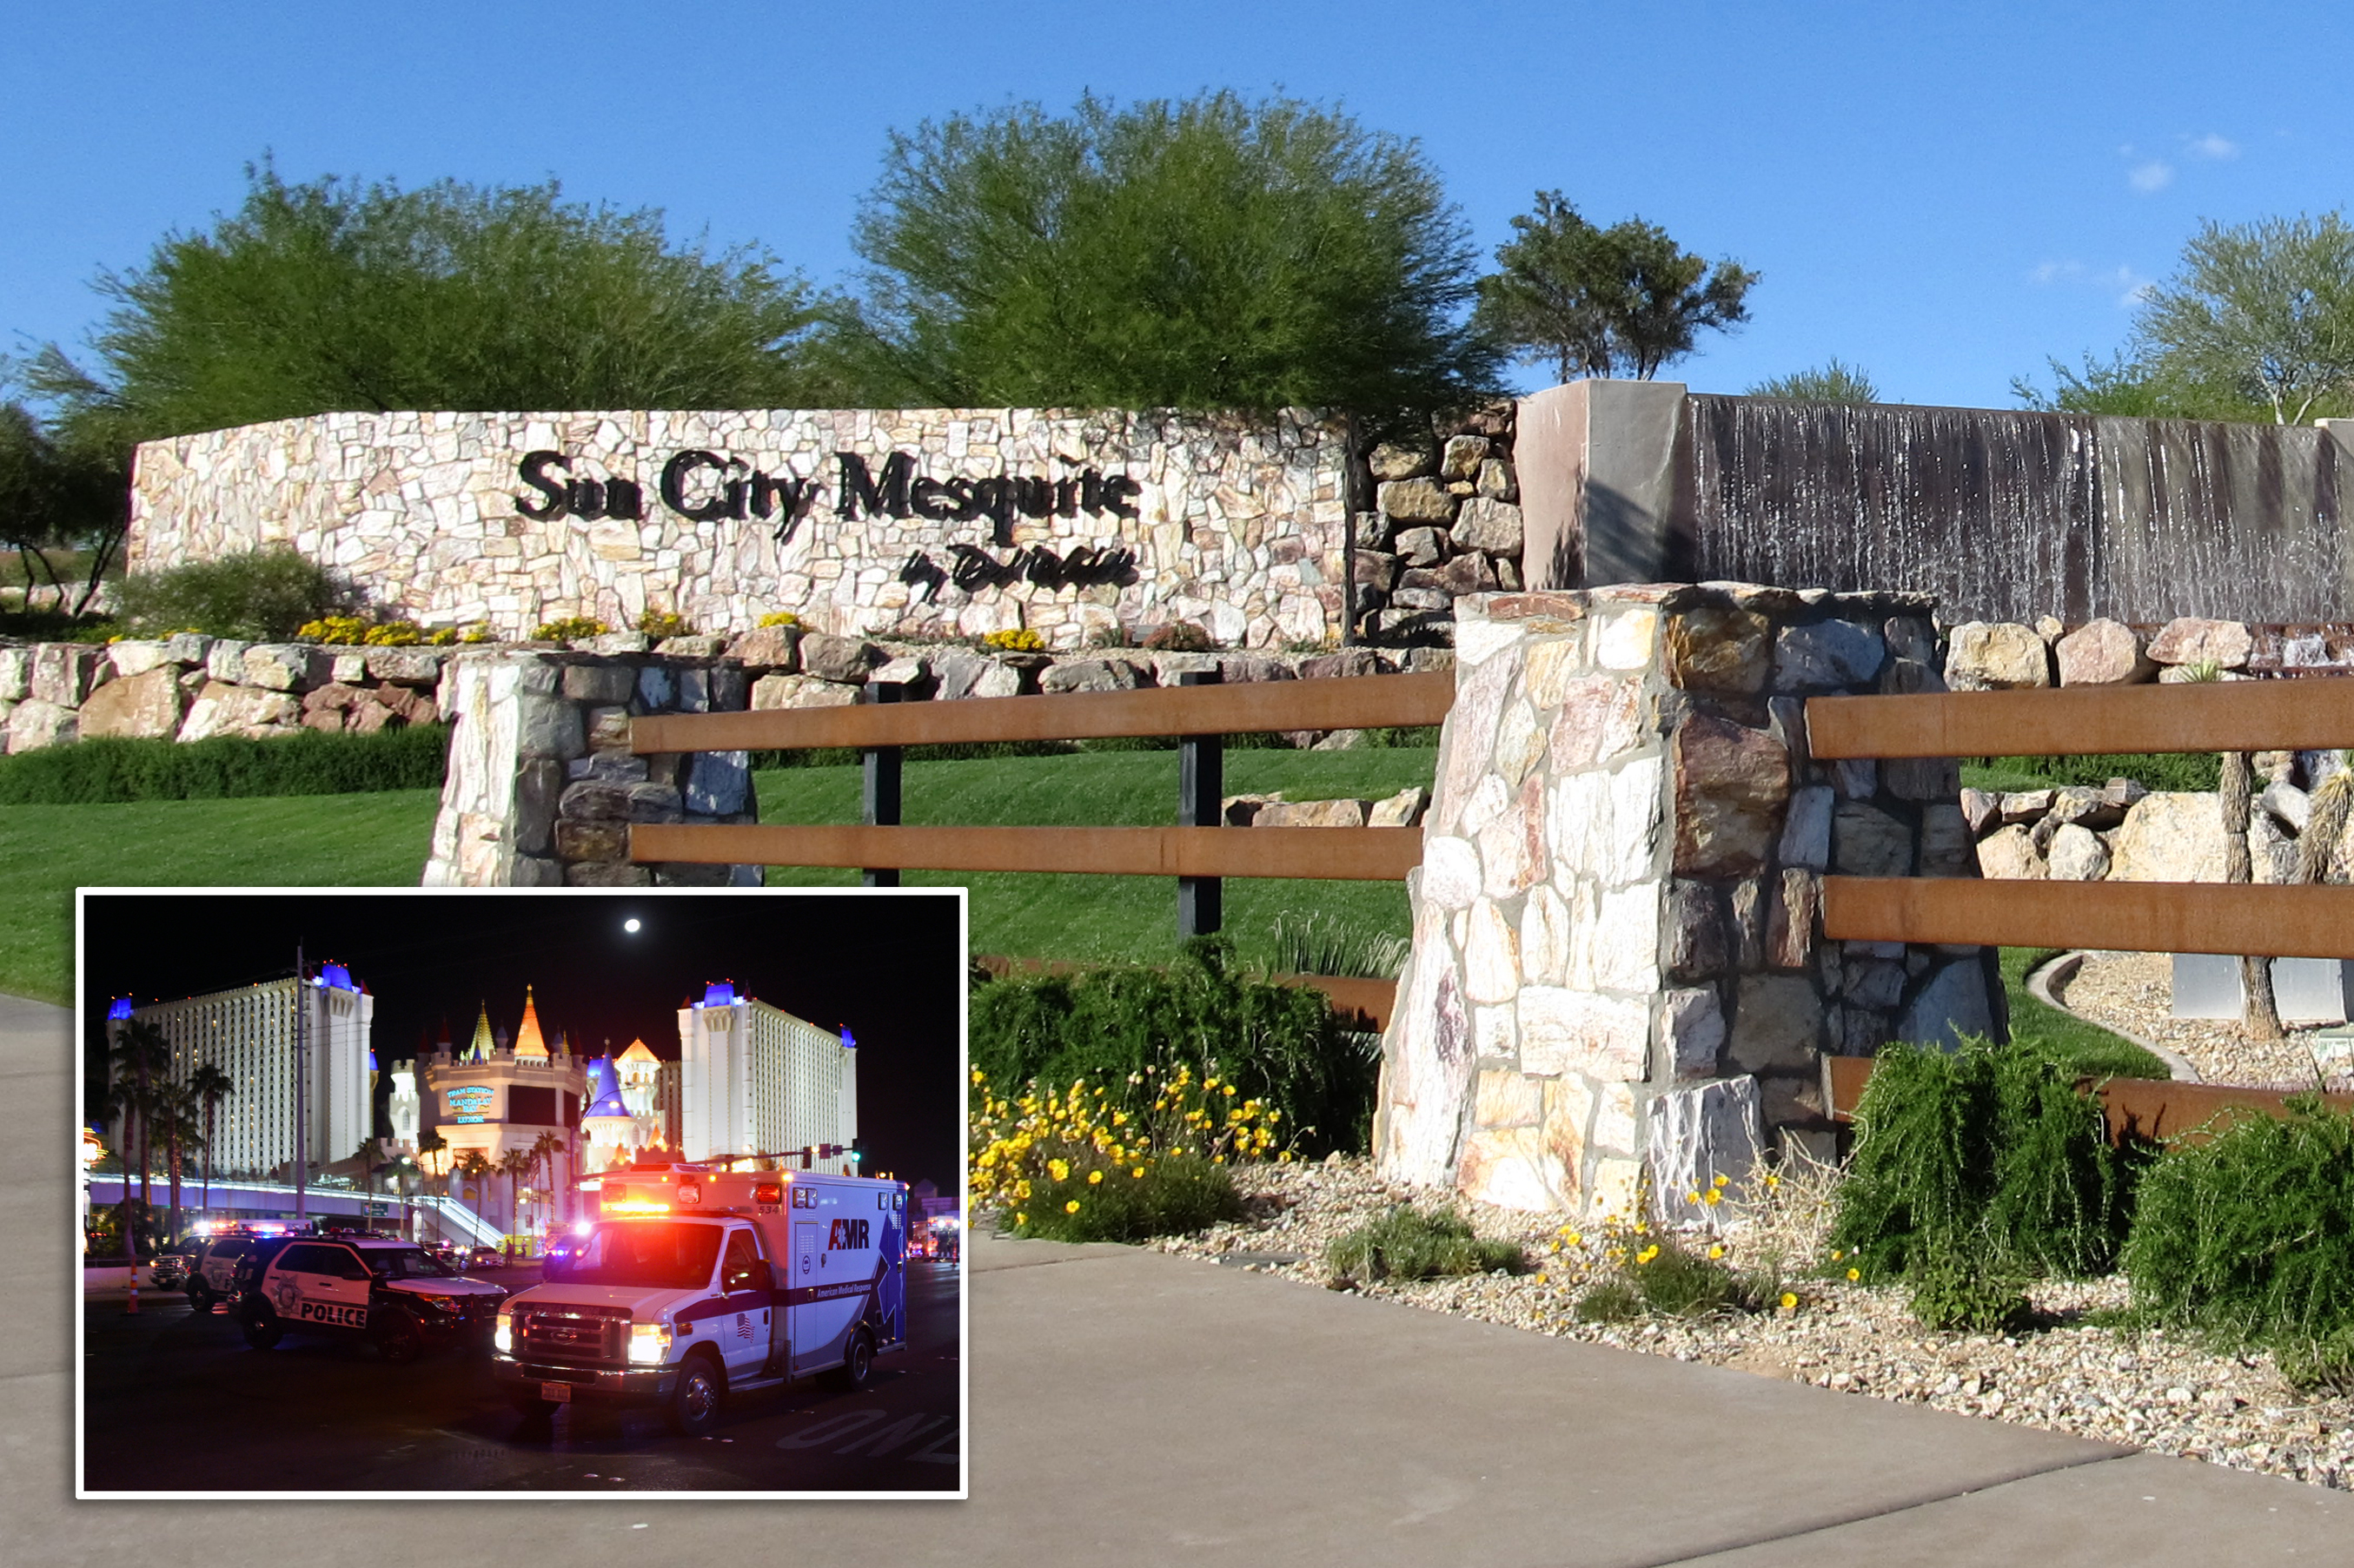 This Is the Affluent Retirement Community Where the Las Vegas Shooter Lived